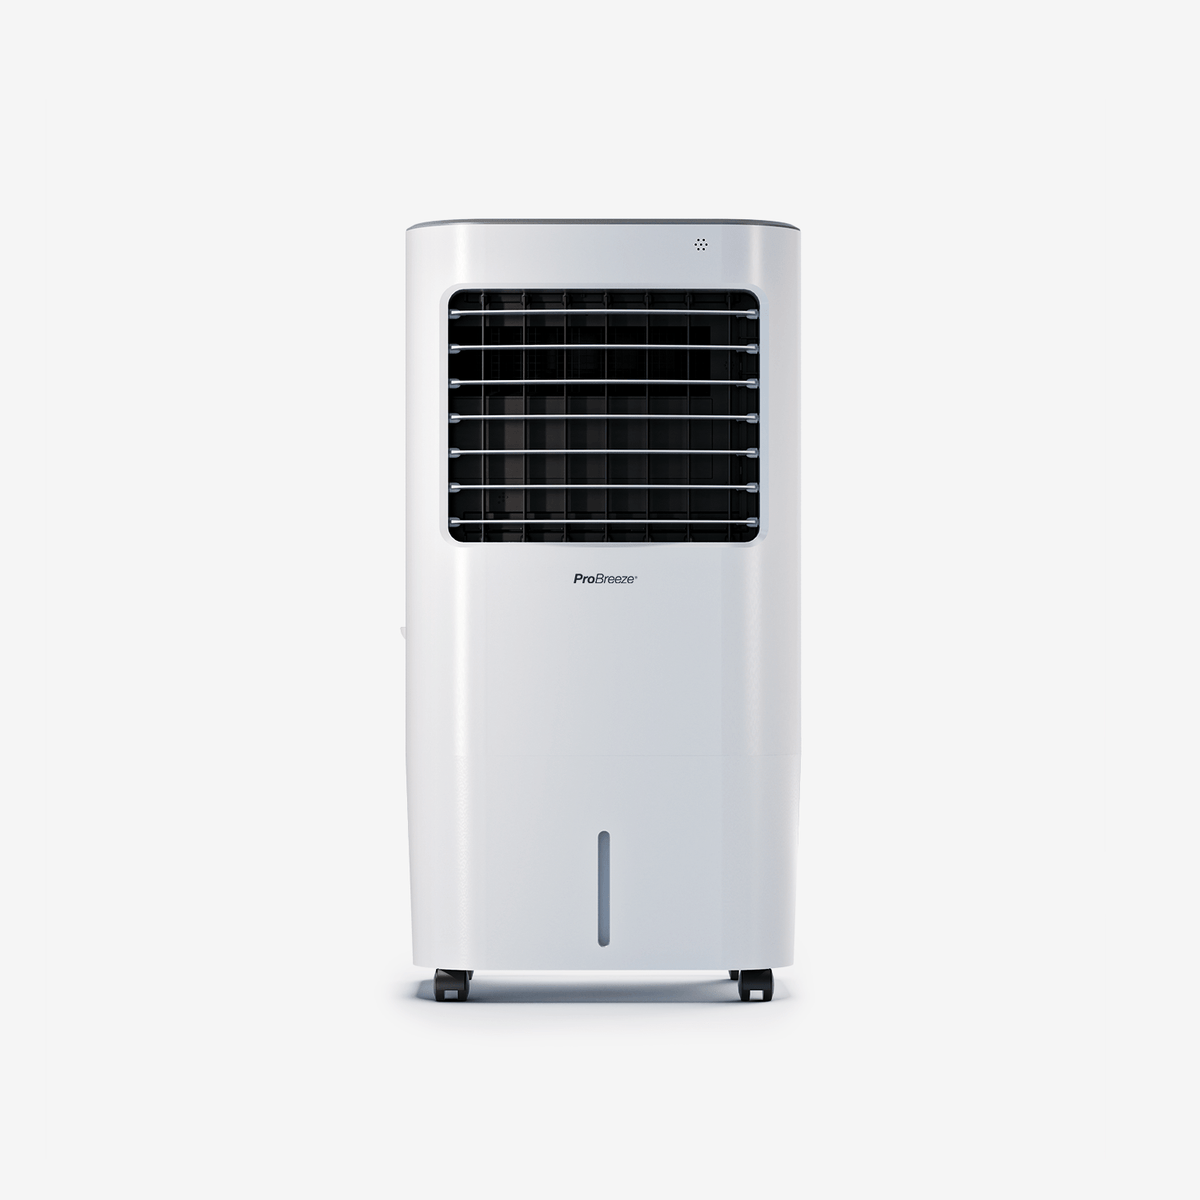 10L Portable Air Cooler with Advanced Cooling Technology - 4 Operational Modes